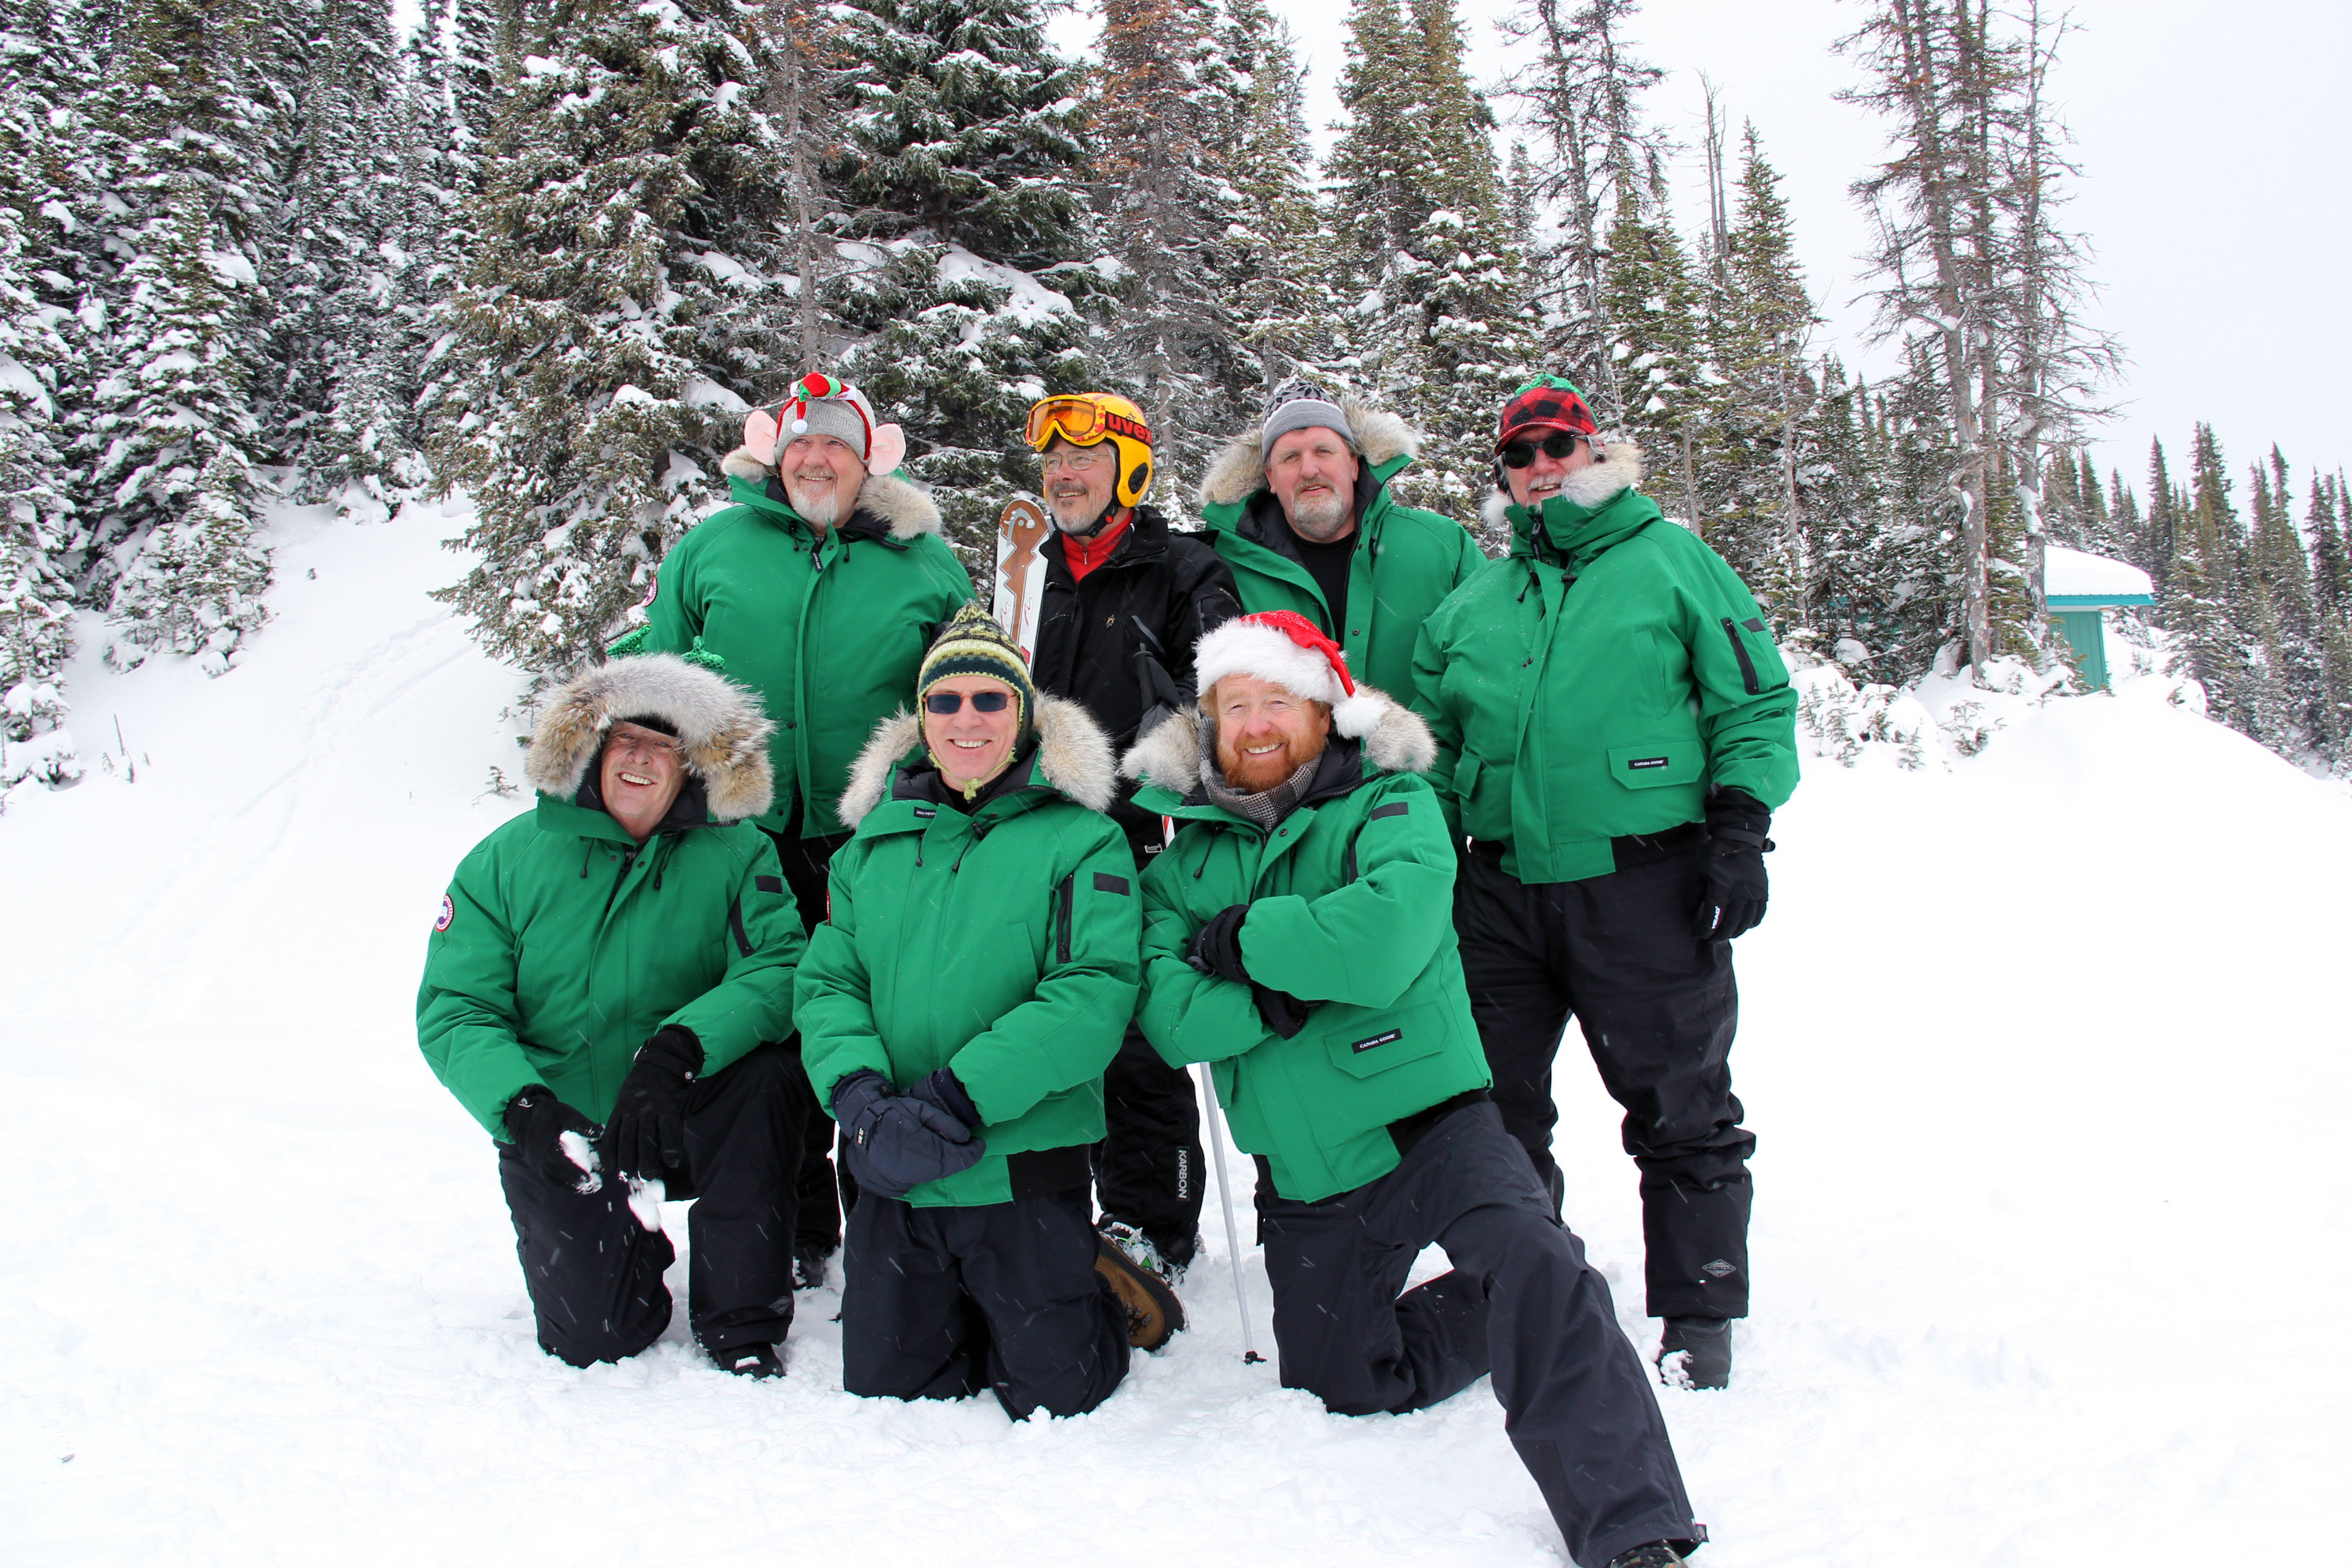 The Irish Rovers w Crazy Canuck downhill racer, Dave Irwin at Sunshine Village in Banff National Park.